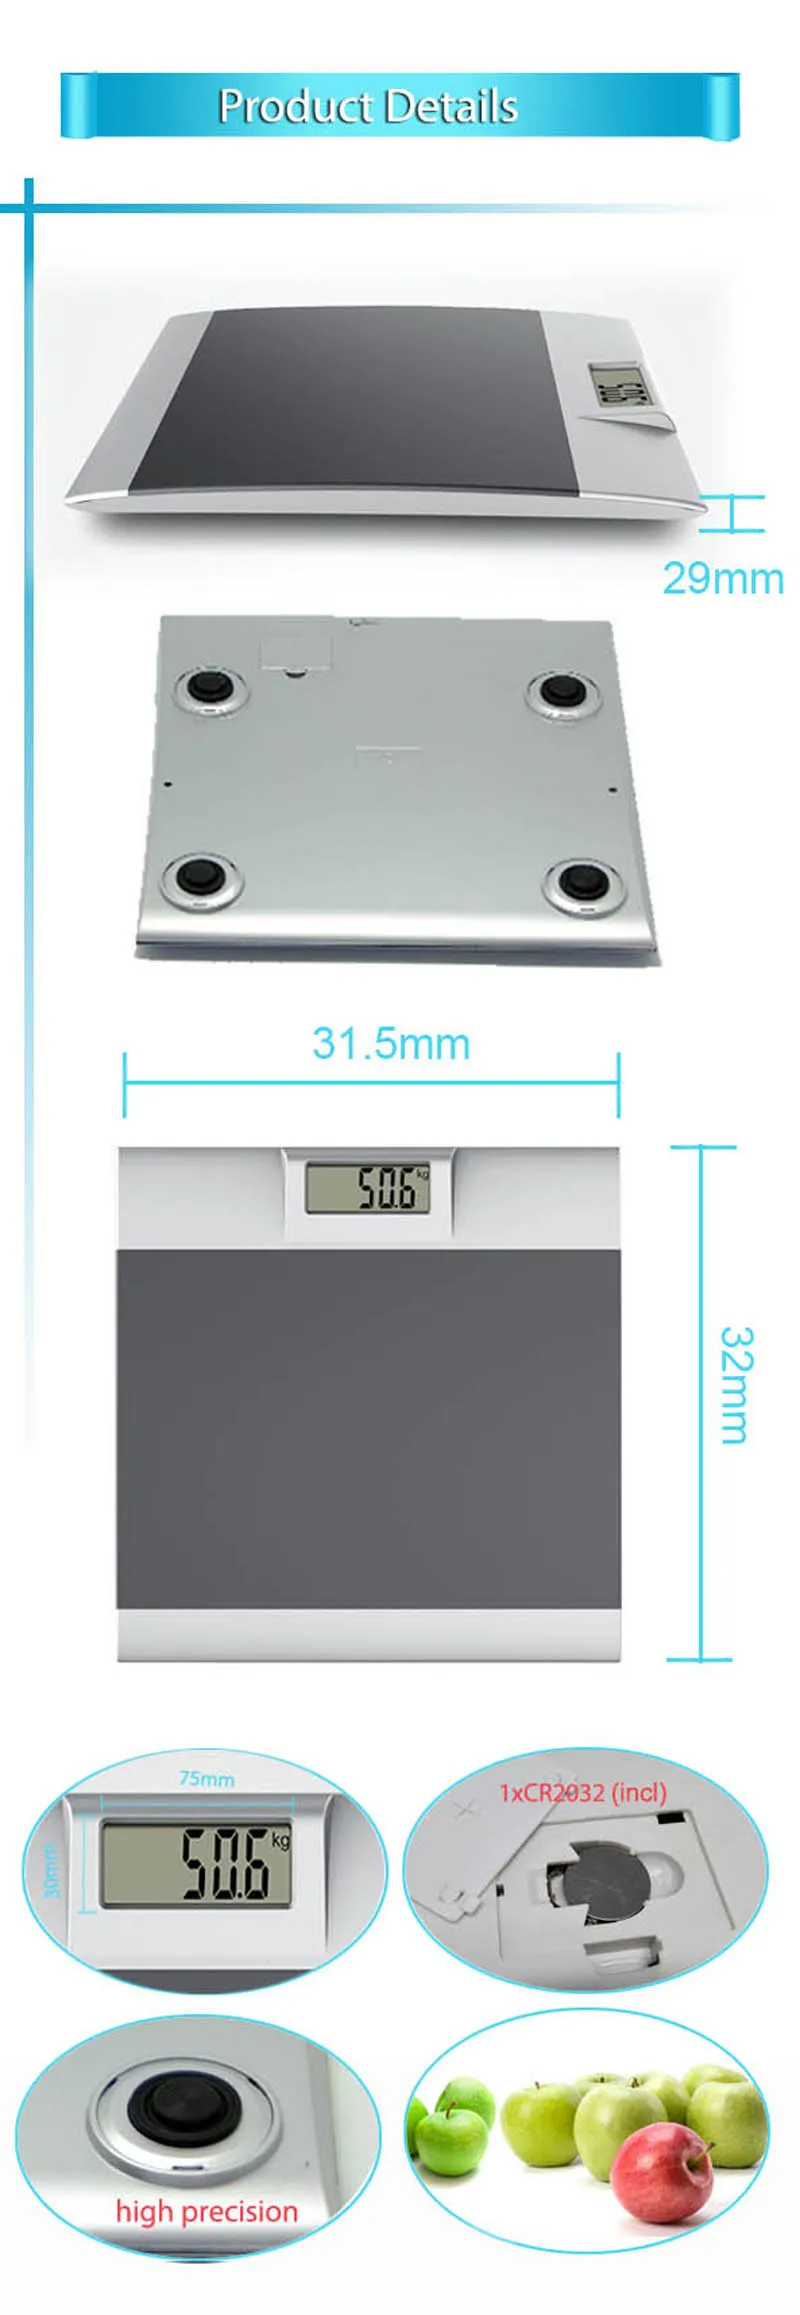 Sunny ABS Plastic Electronic Digital Bathroom Body Weighing Fat Scale